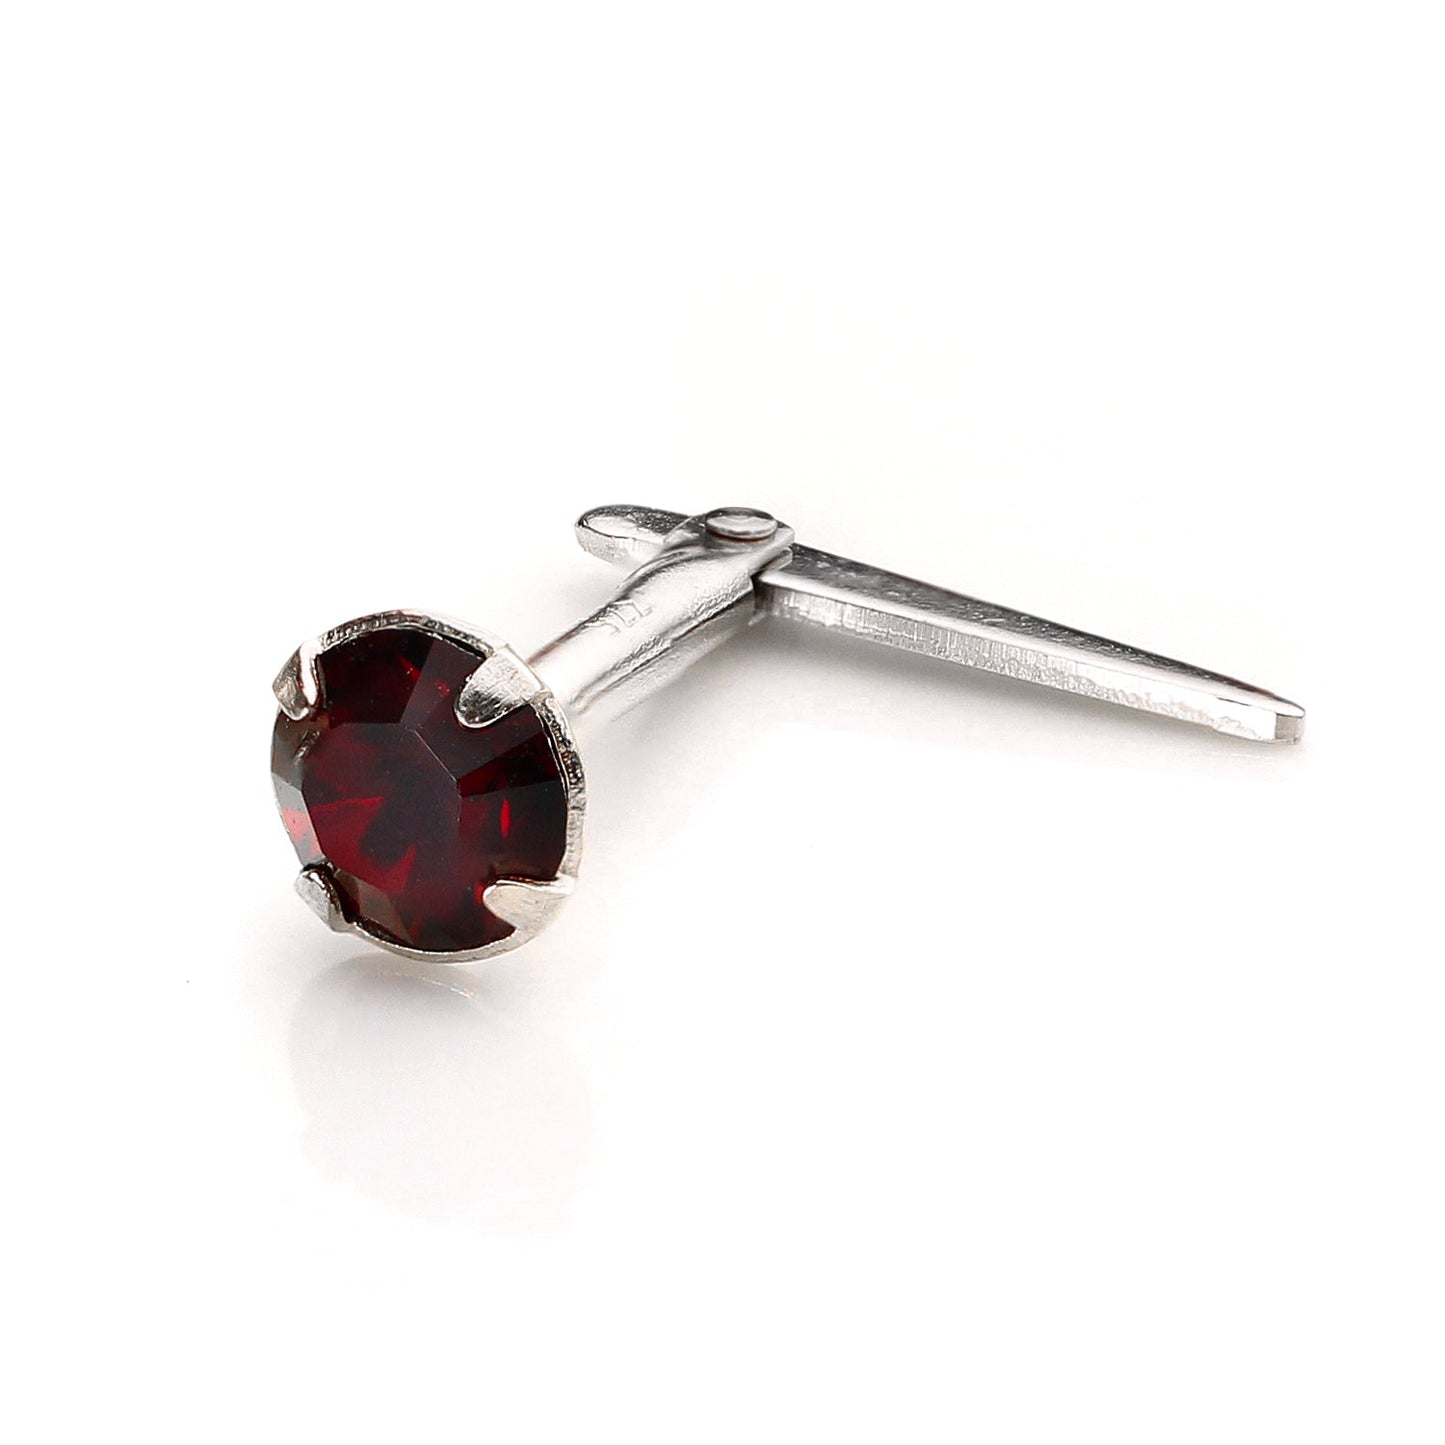 Sterling Silver Andralok Nose Stud with 3mm Crystal